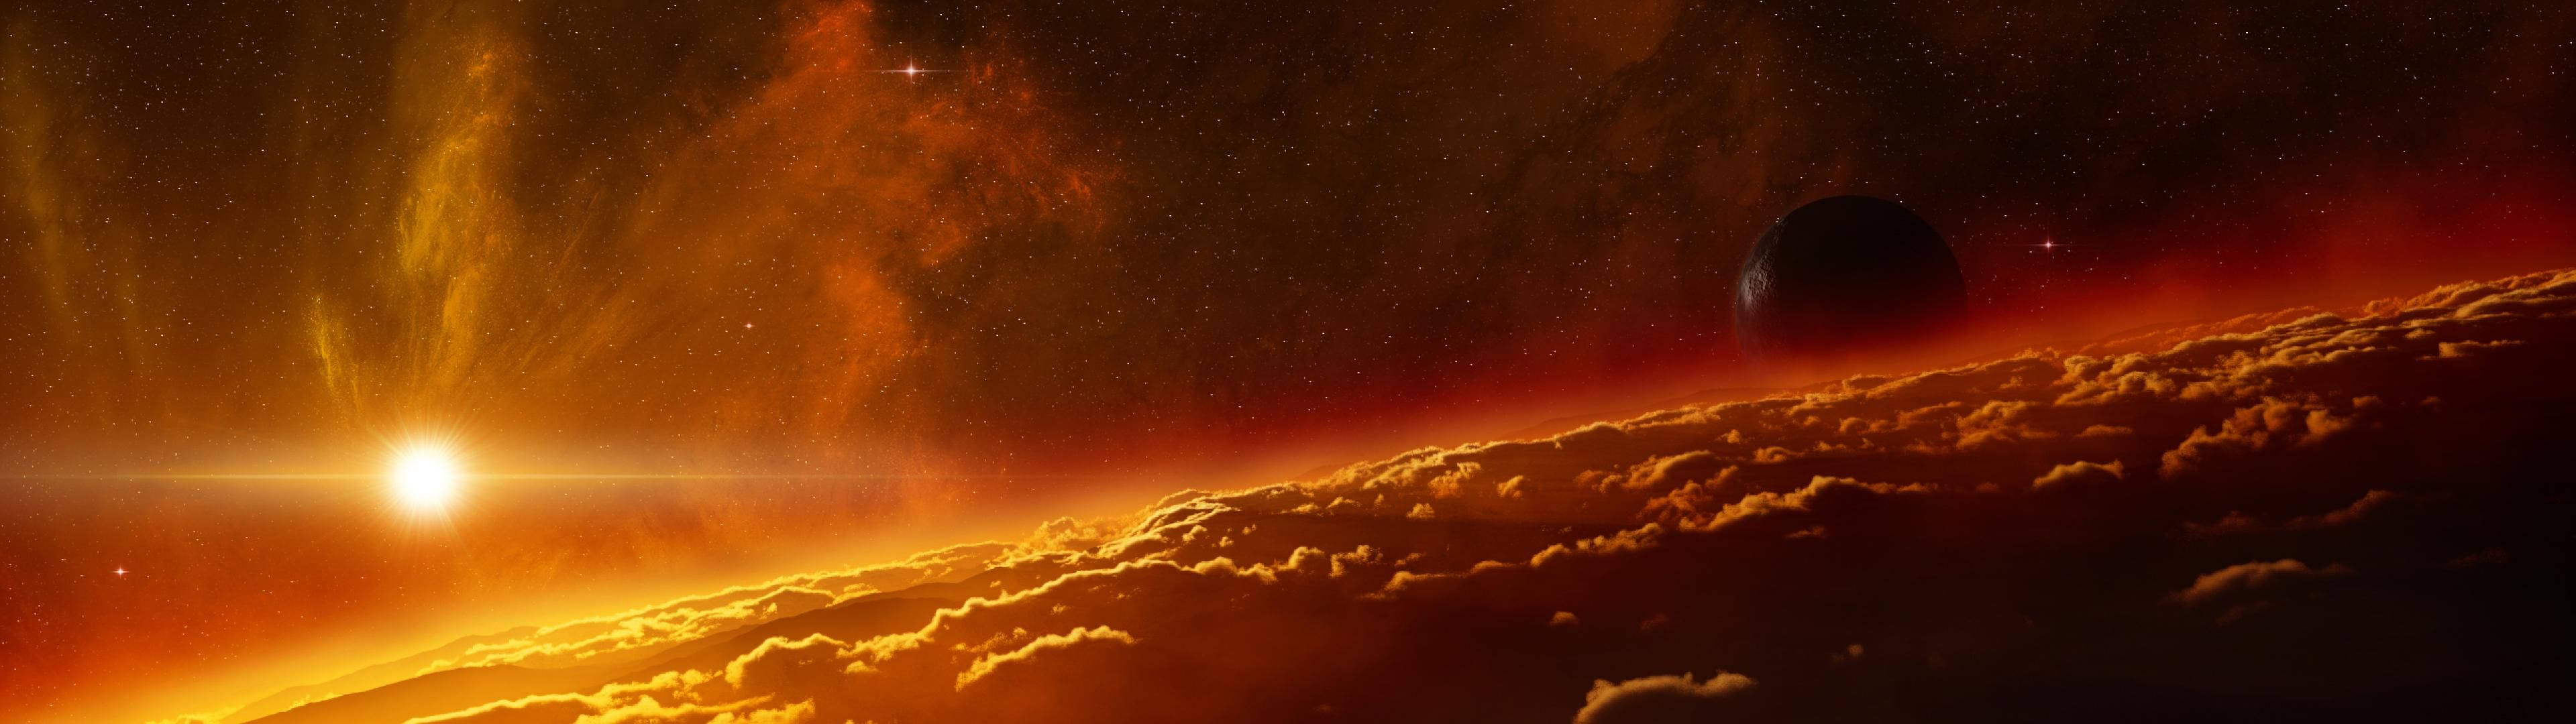 Widescreen Blazing Sun On Space Background